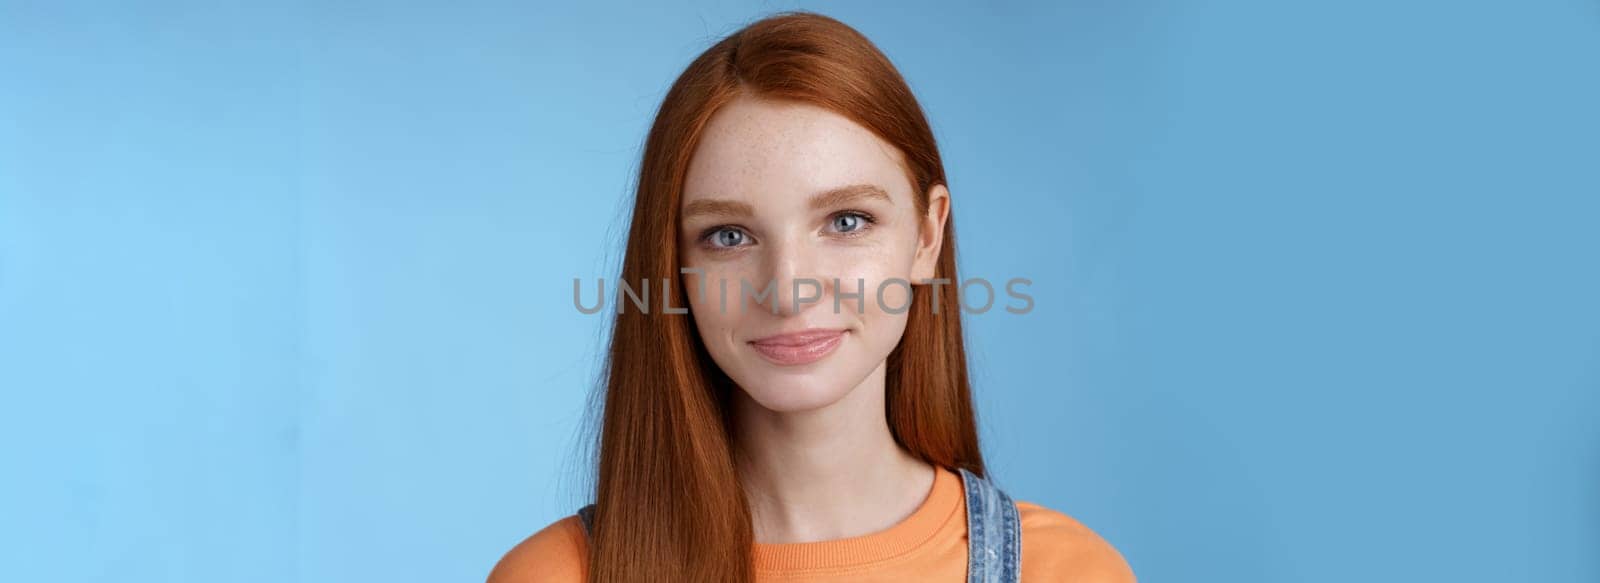 Outgoing young redhead girl blue eyes wearing orange t-shirt overalls smiling pleasantly casually talking standing good mood joyful emotions blue background, listening interesting conversation.